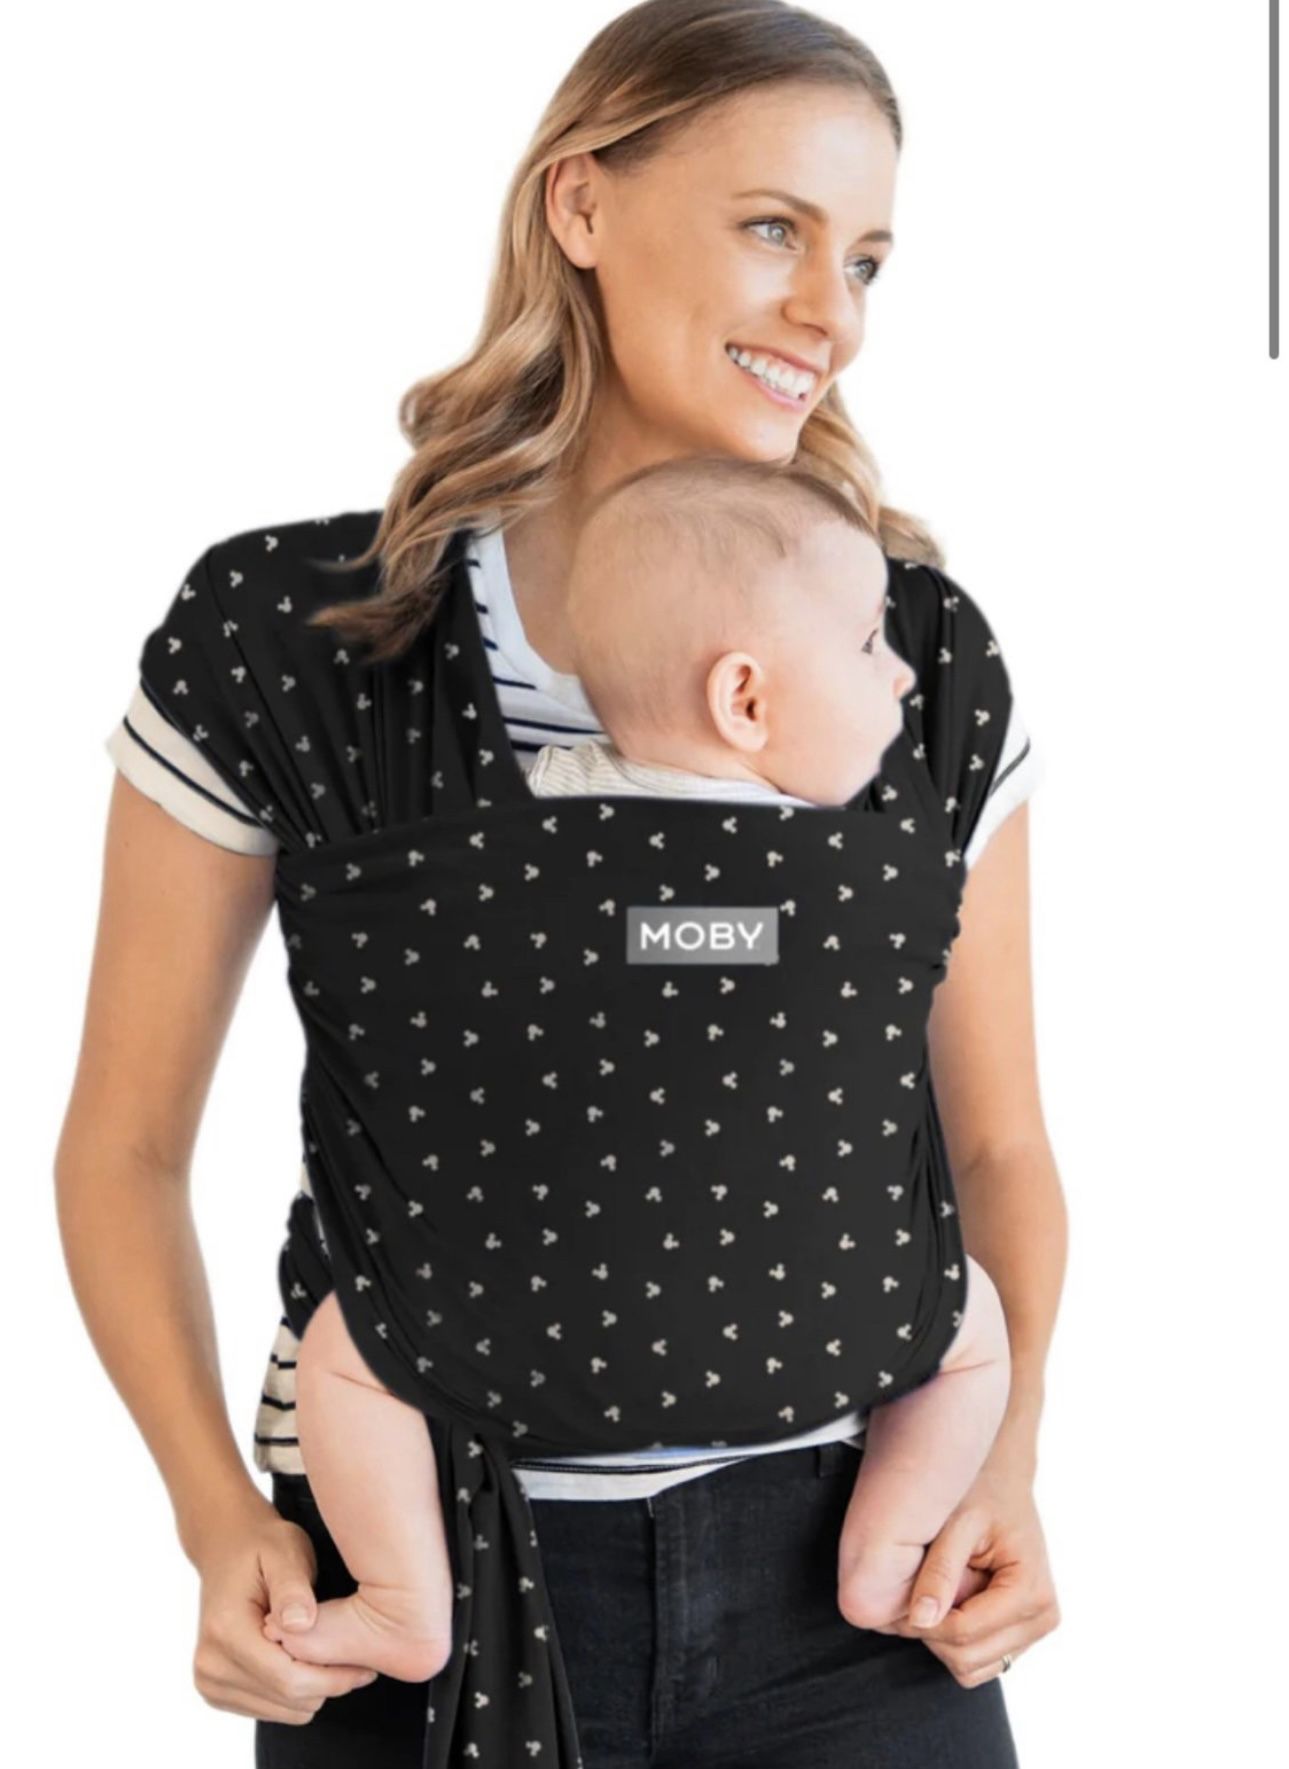 Baby Moby Wrap Carrier Disney Print